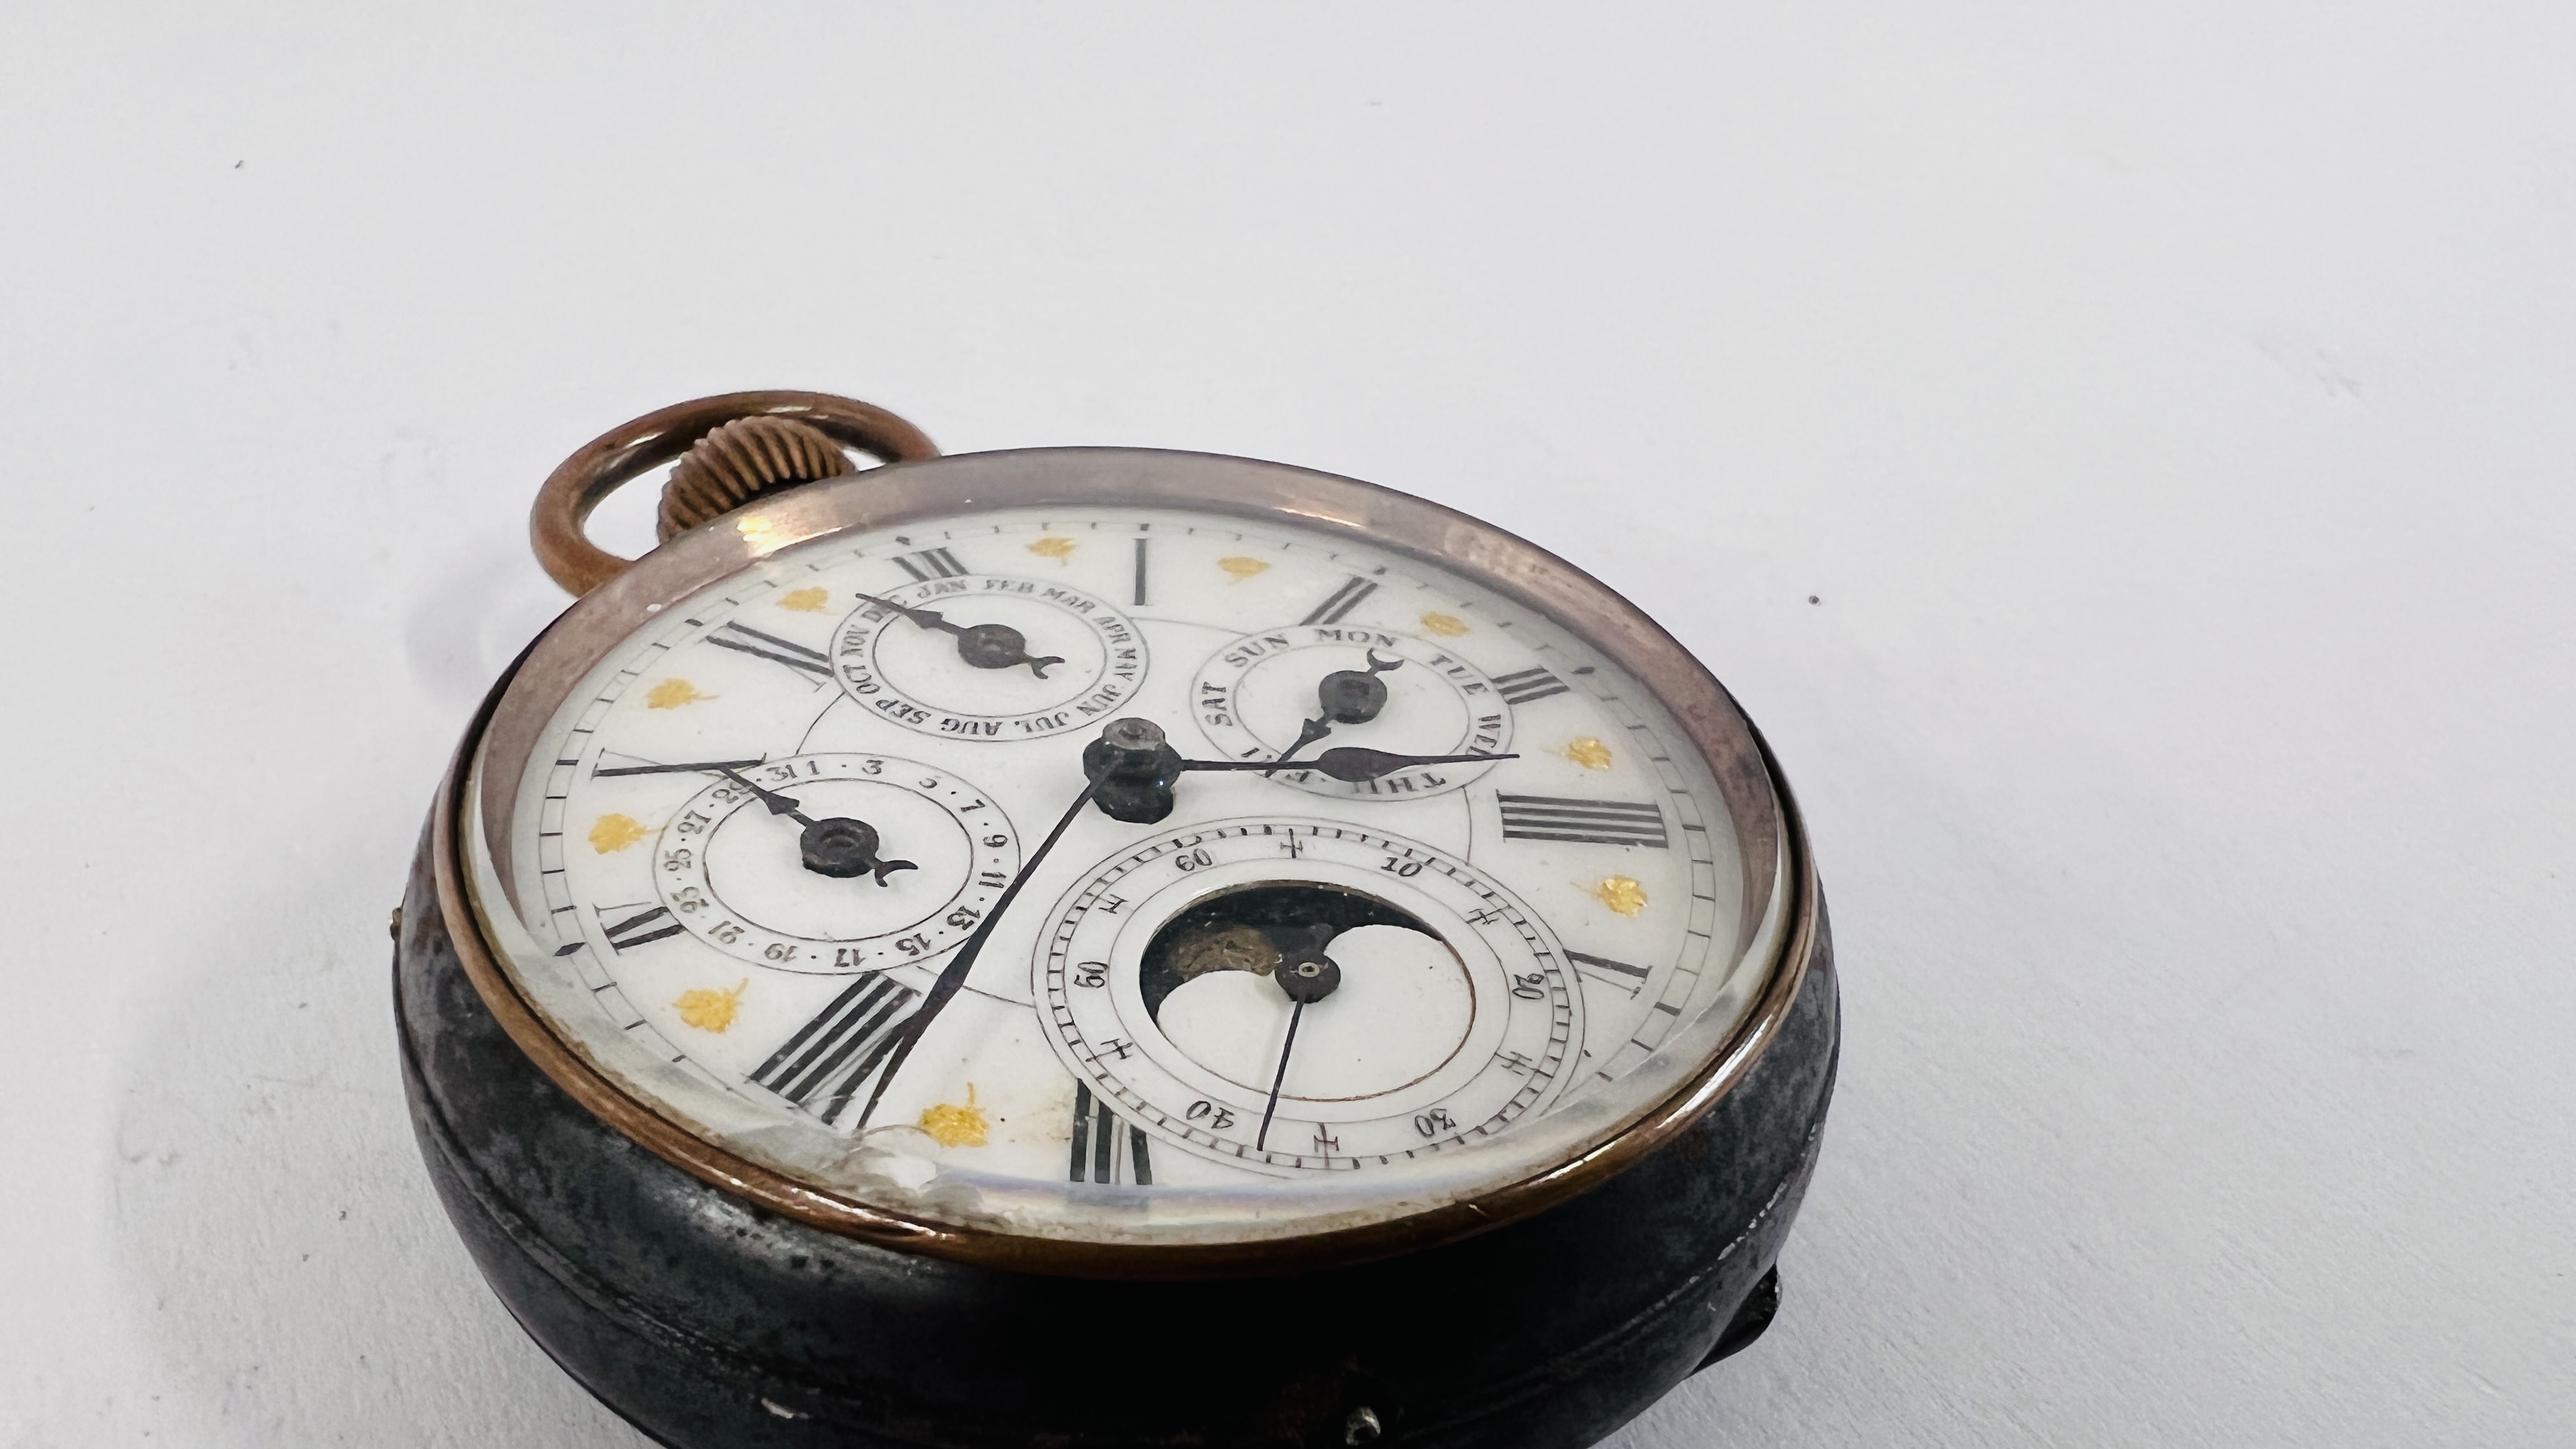 AN ACIER GARANTI SWISS MOON PHASE POCKET WATCH WITH FOUR SUBSIDERY DIALS, - Image 3 of 12